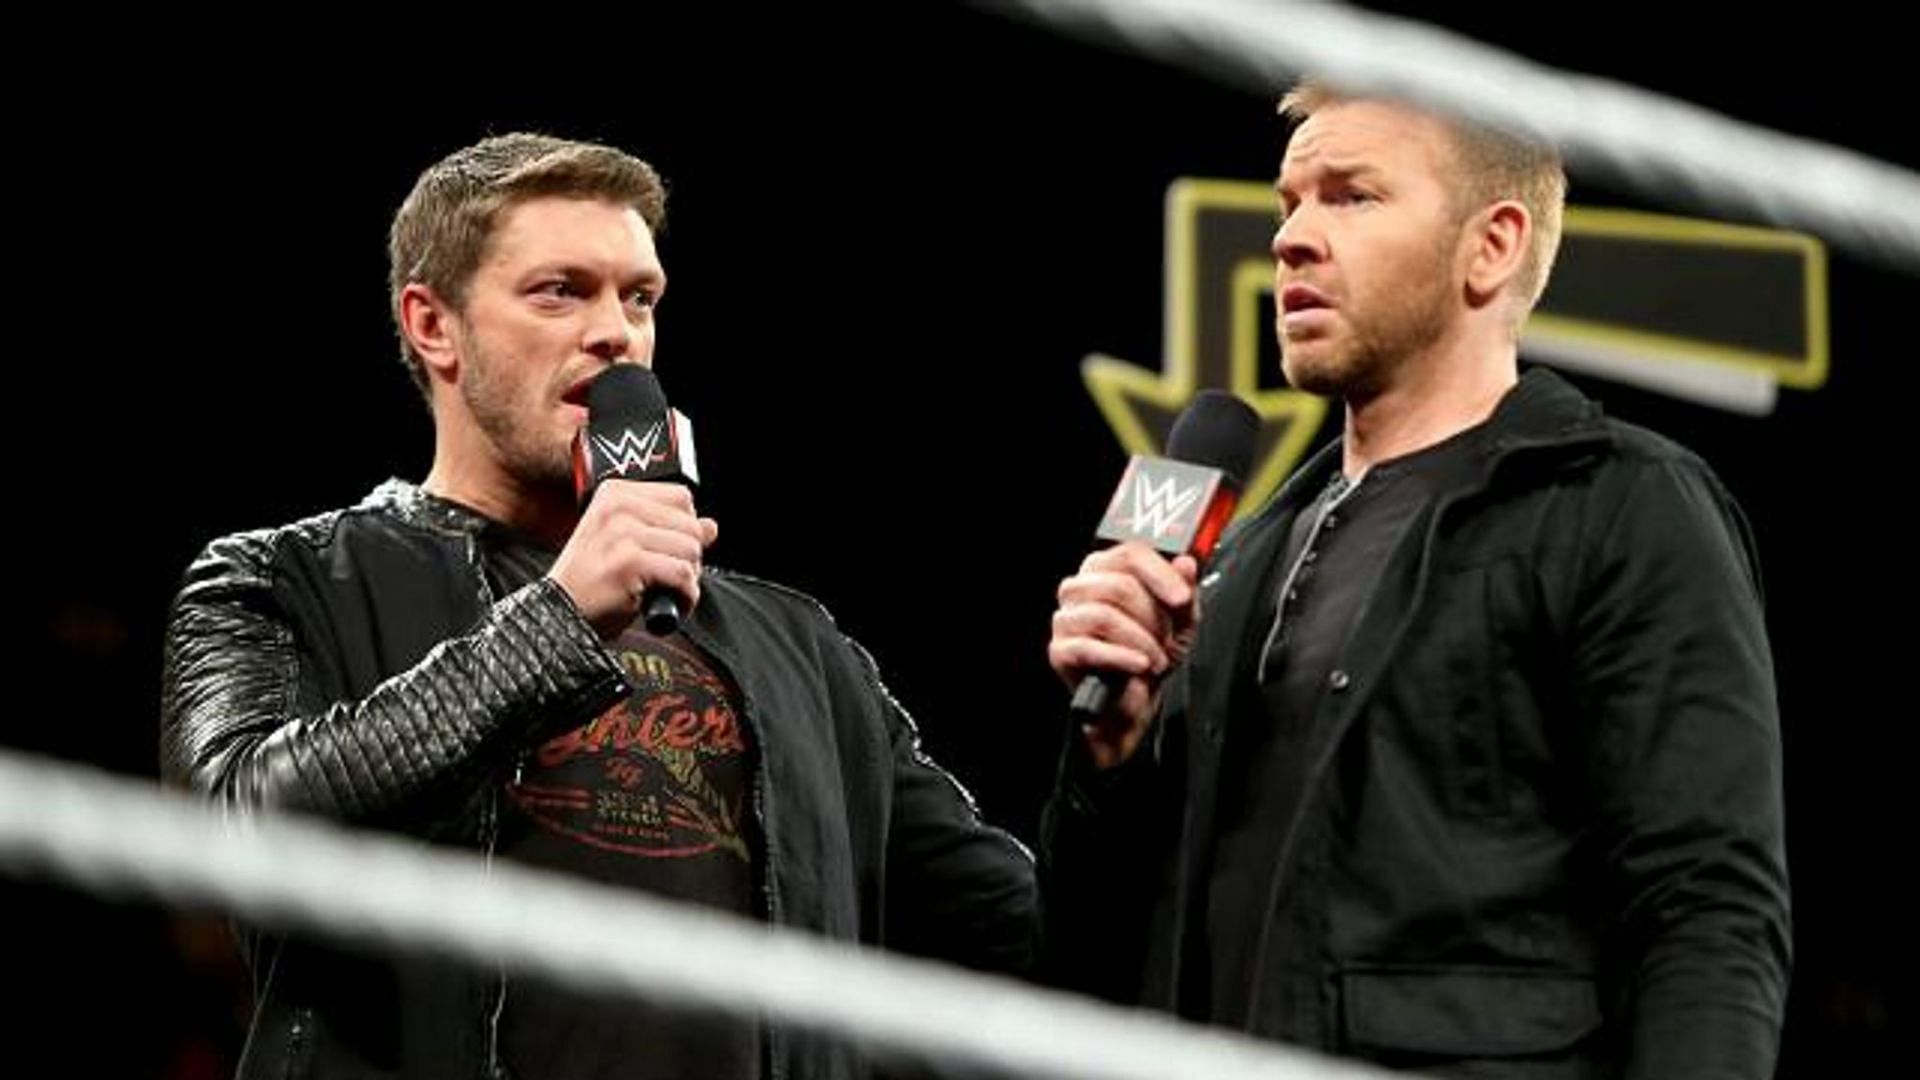 Edge and Christian are multiple time WWE Tag Team Champions